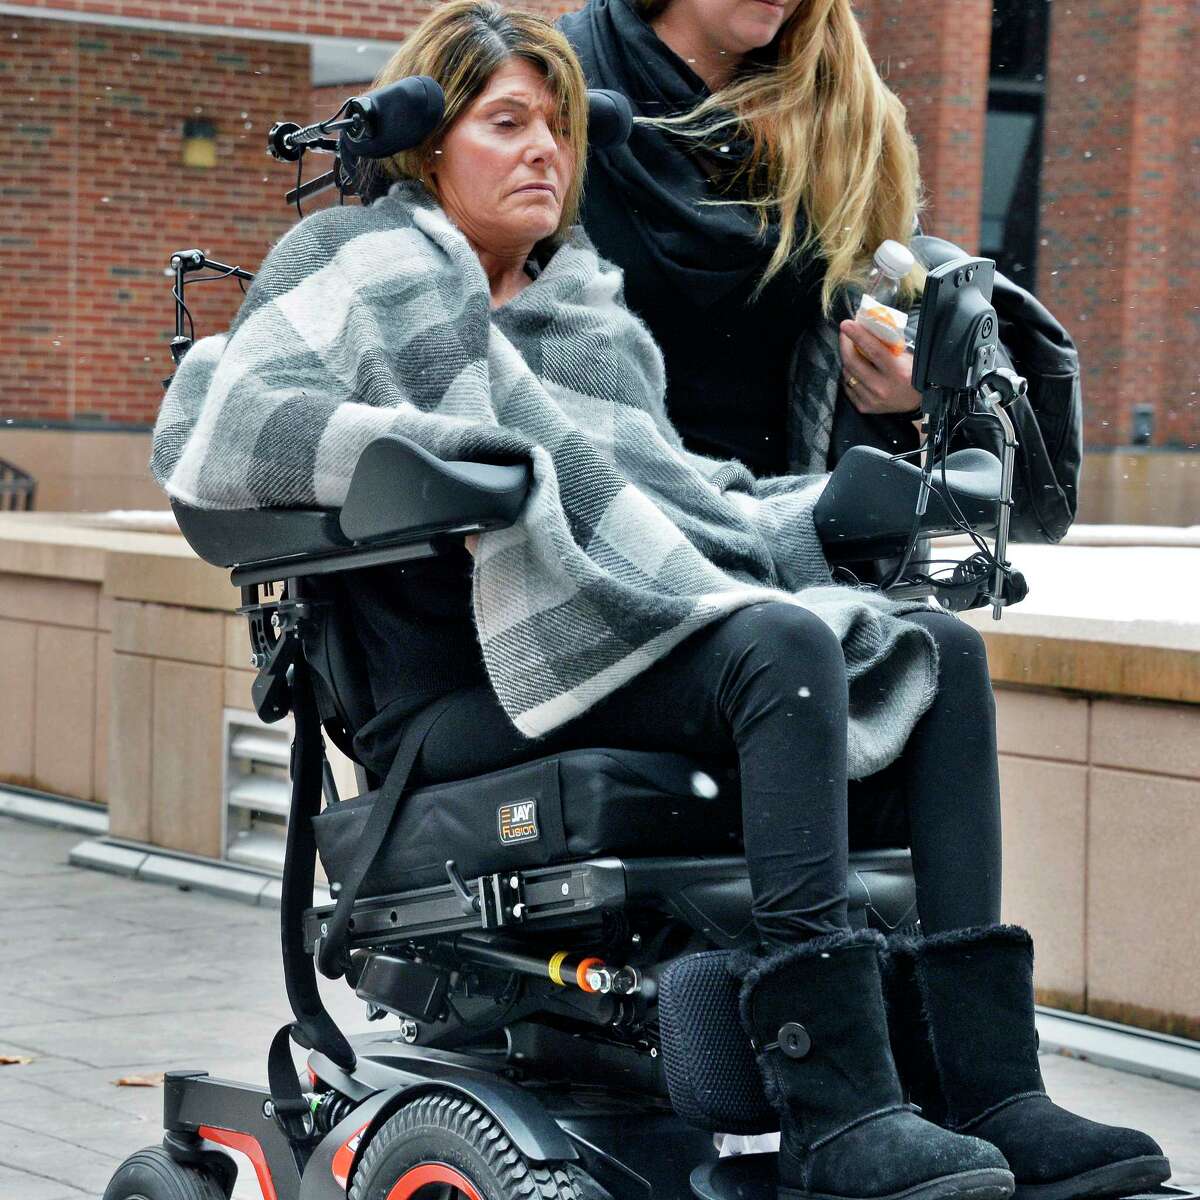 Deann Shapiro, 50, of Cohoes, a victim of car crash who is now a quadriplegic, leaves Saratoga County Court Thursday March 8, 2018 in Ballston Spa, NY. (John Carl D'Annibale/Times Union)